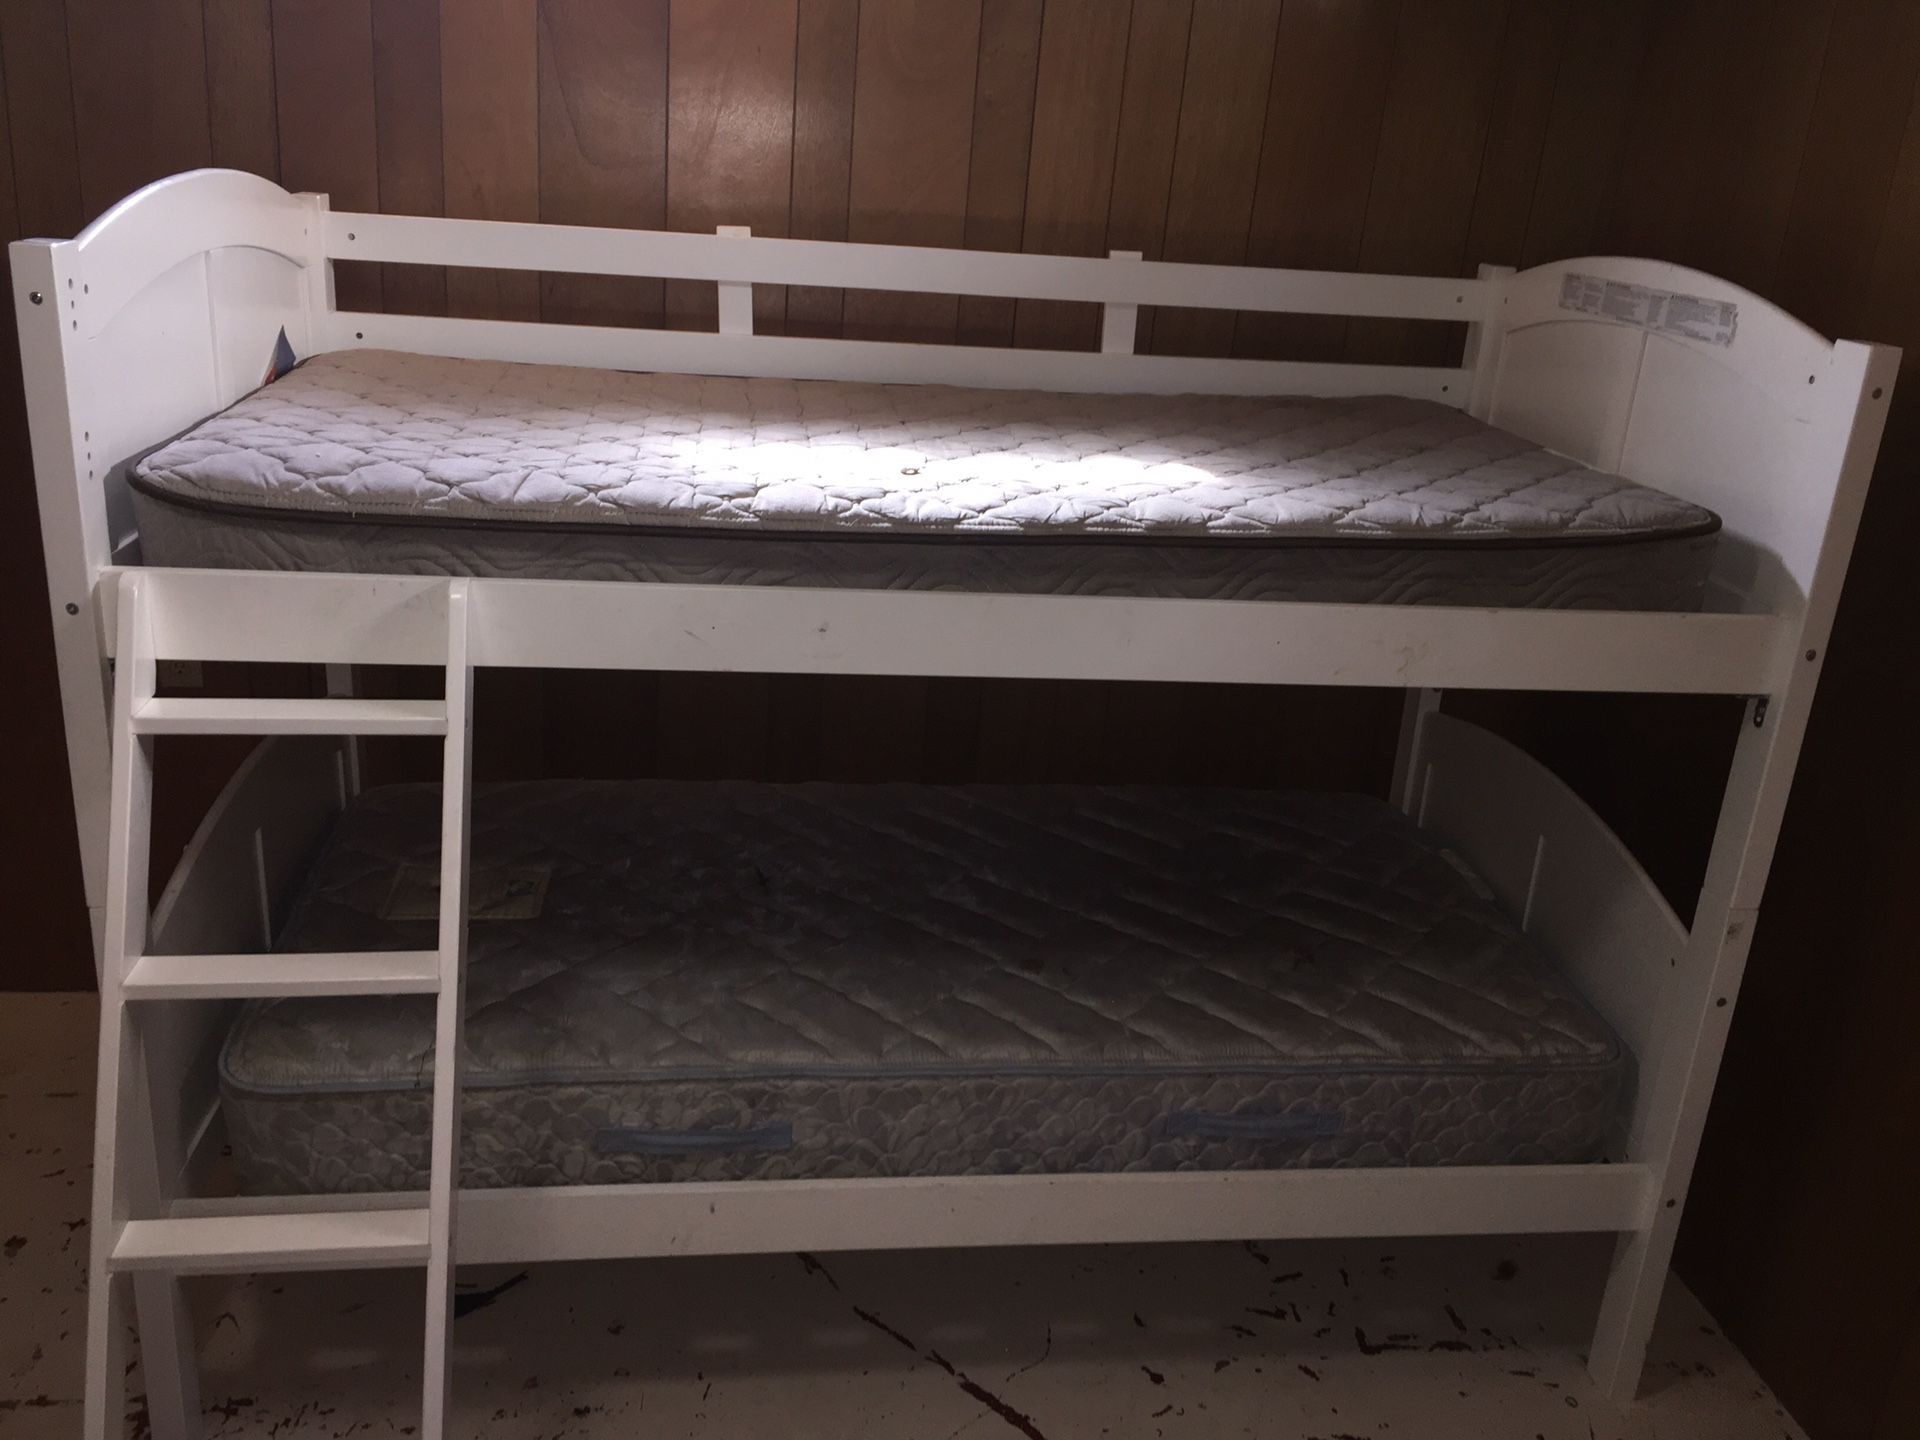 Bunk bed or 2 twin beds